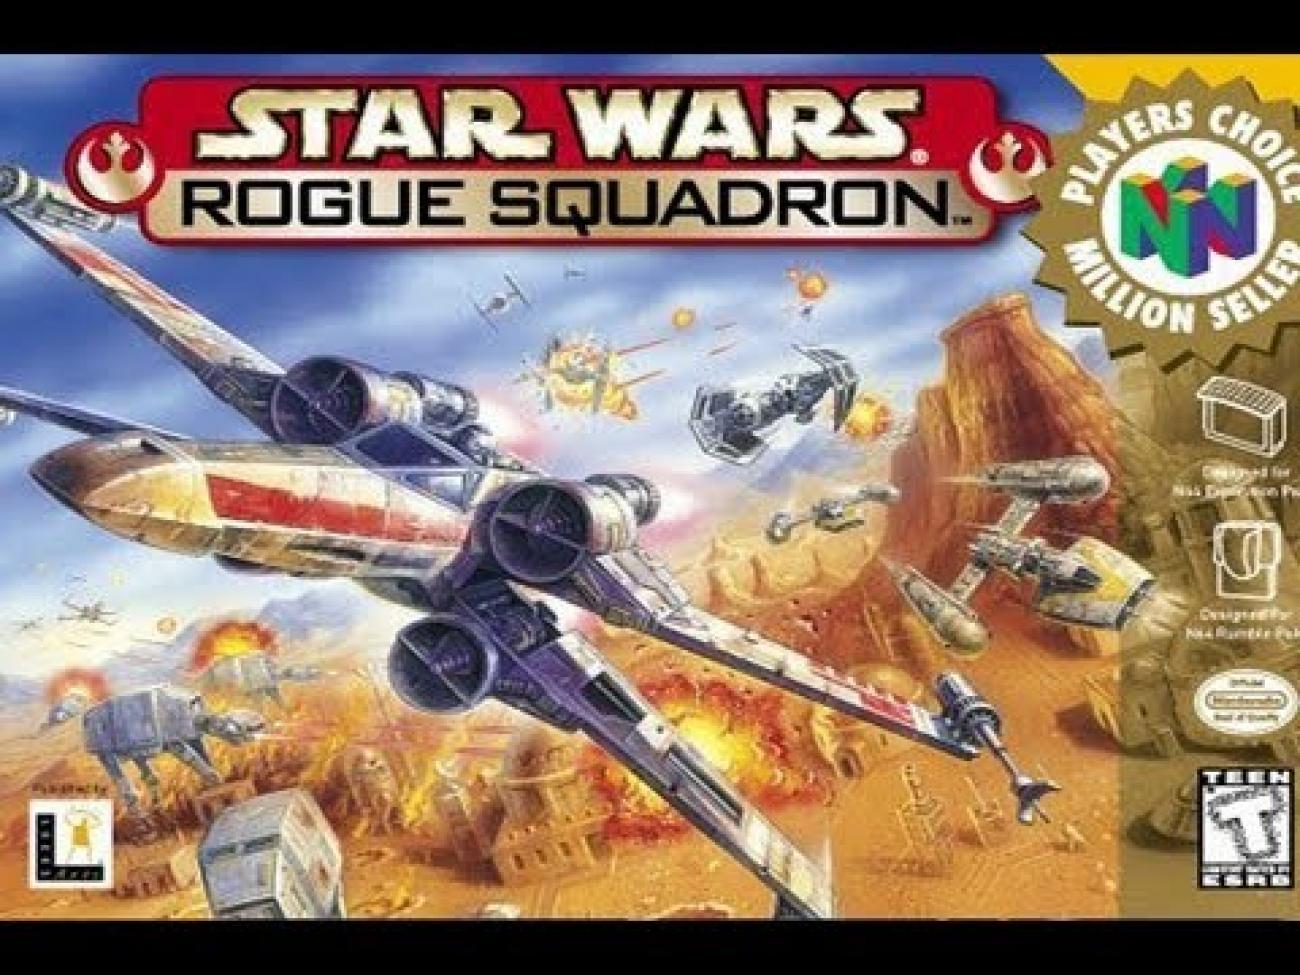 Info for the canned Rogue Squadron Trilogy Remake for Wii